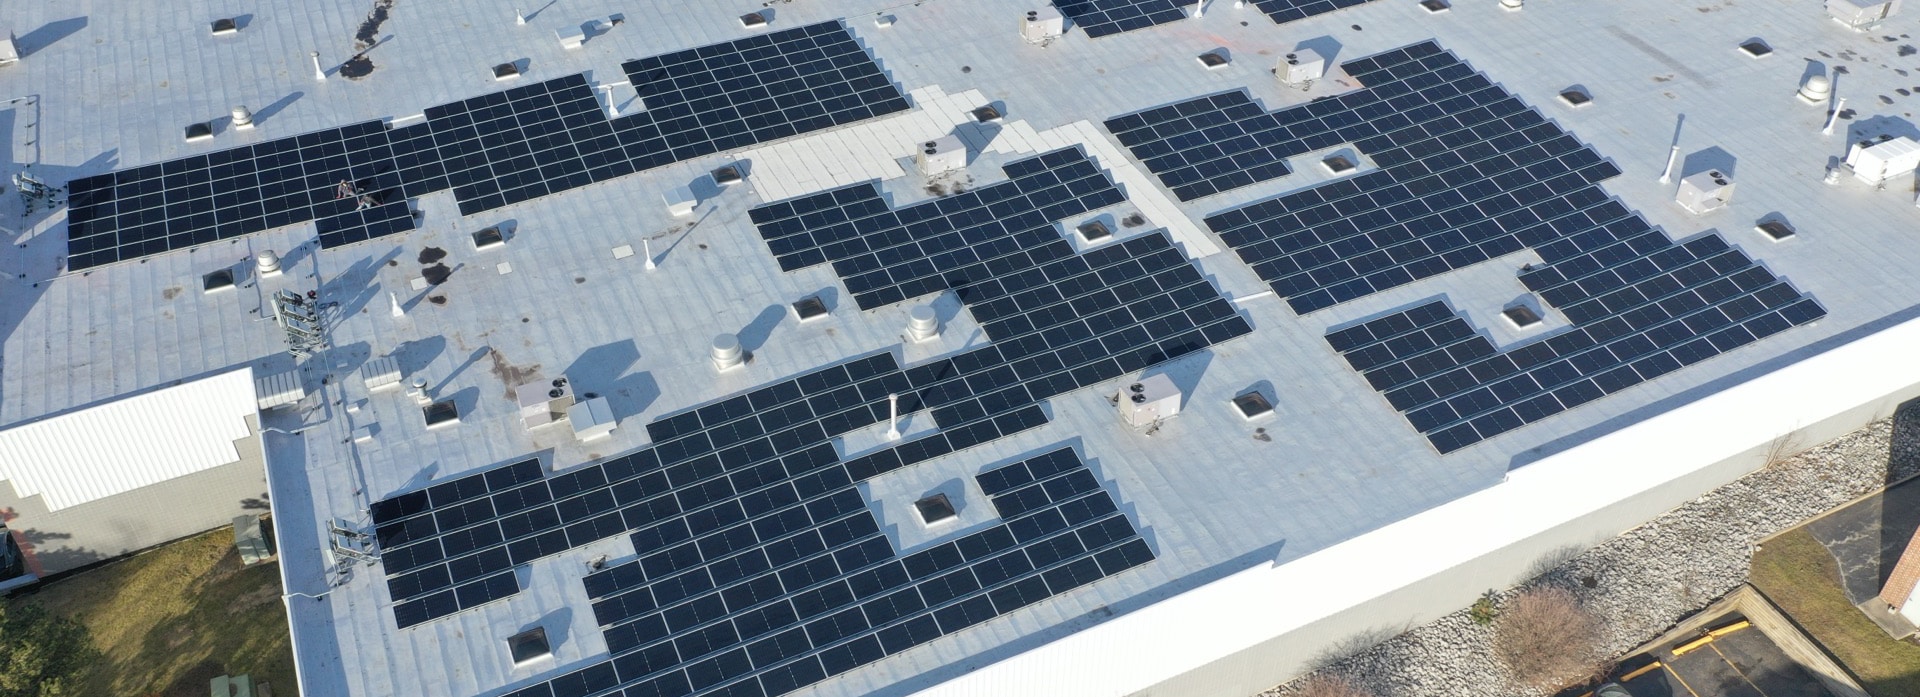 Solar Panel installation on a Flat roof